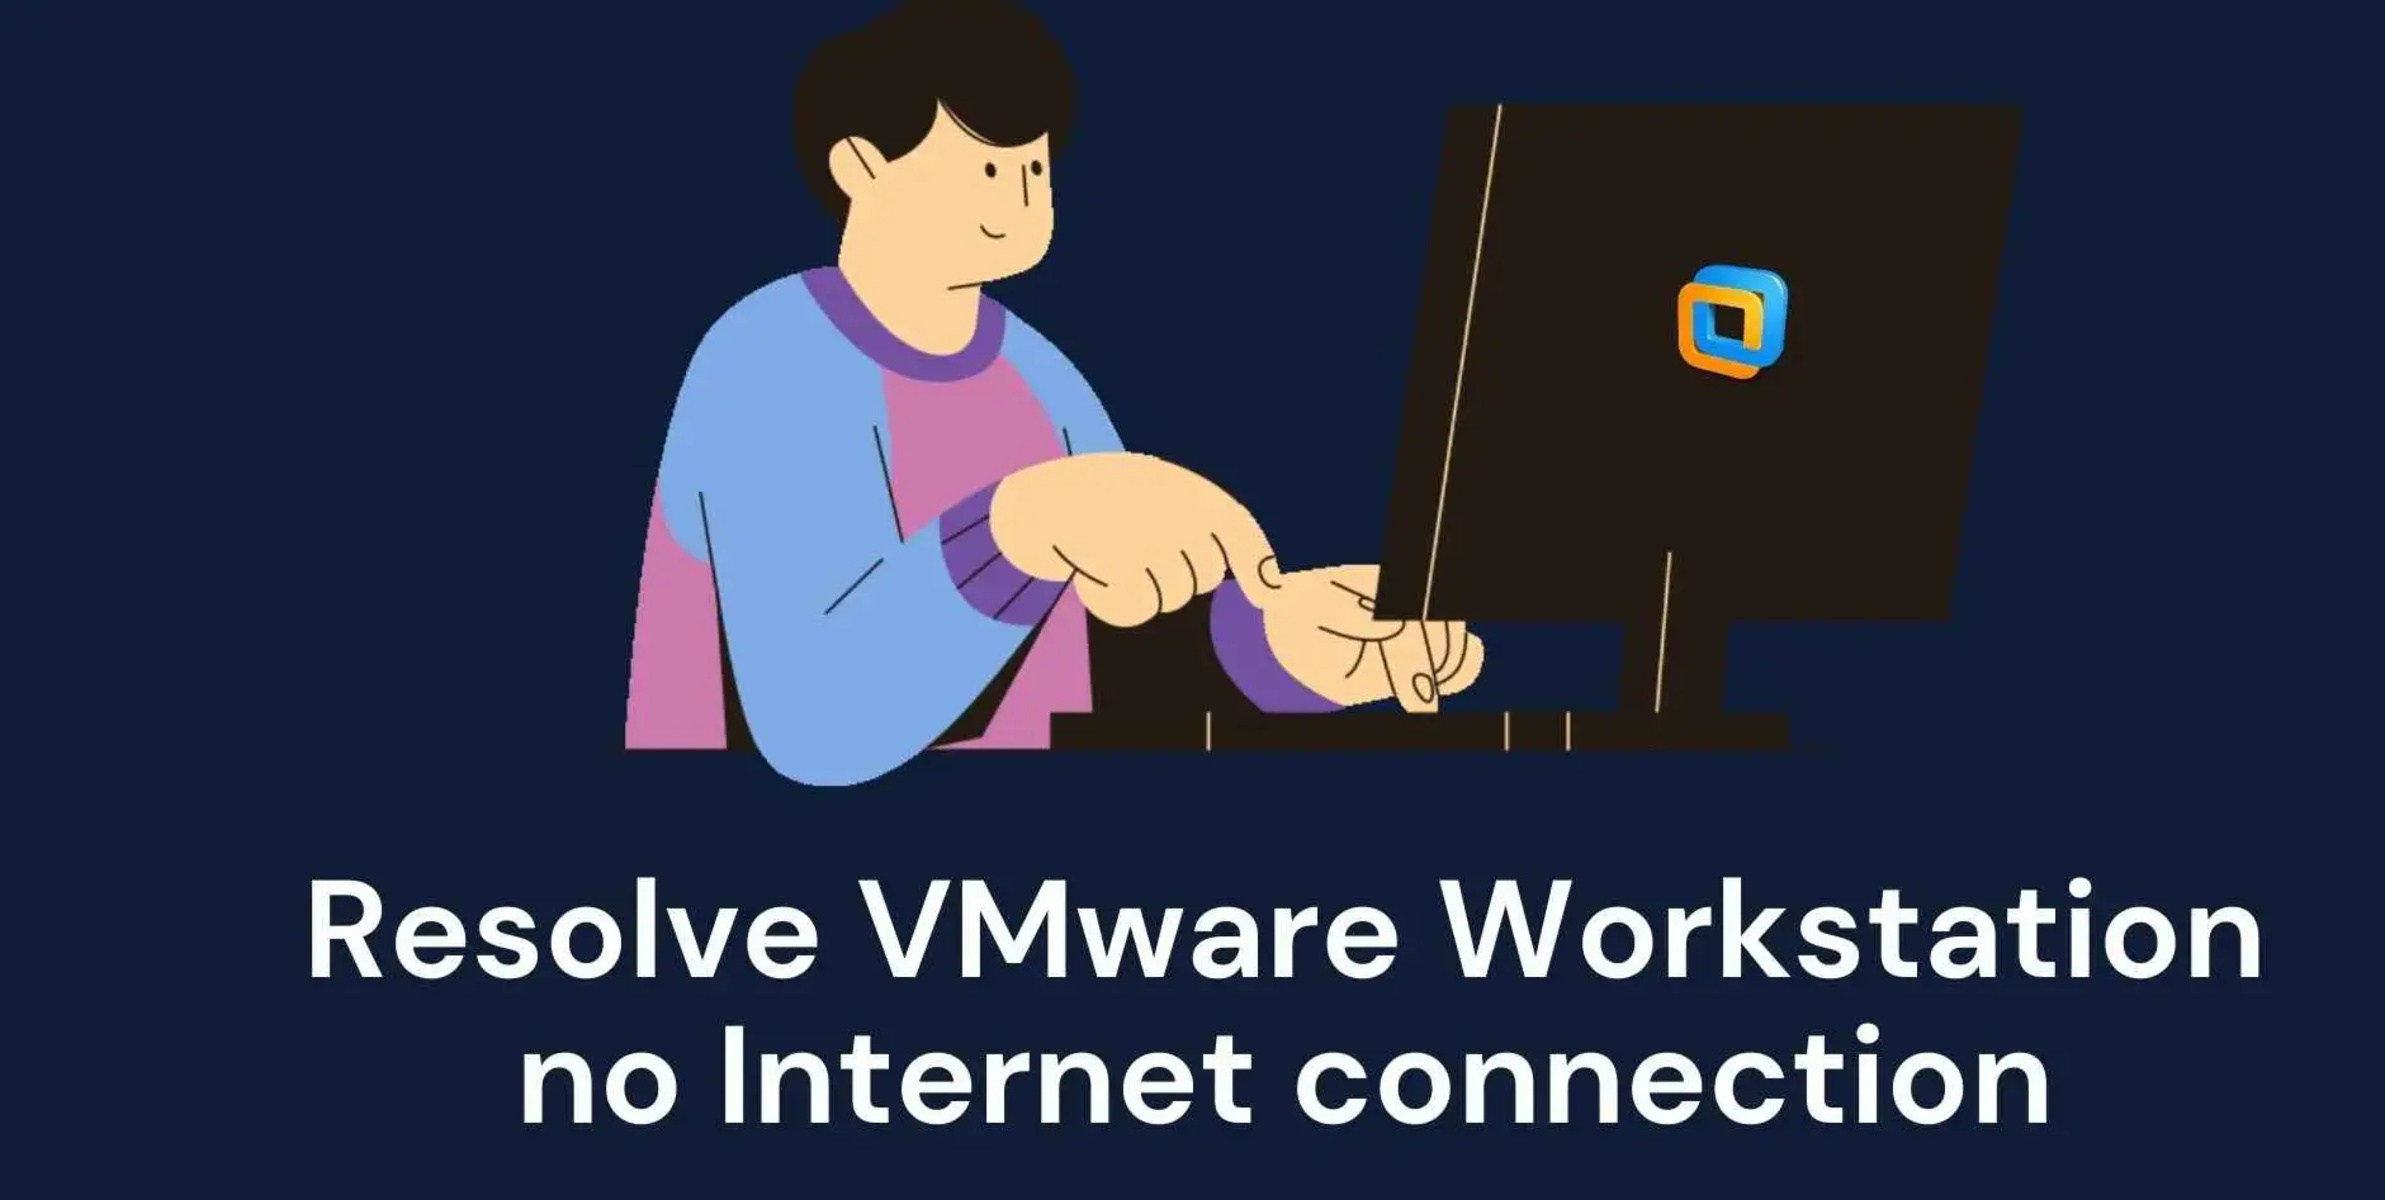 How To Enable Internet Connection In VMware Workstation